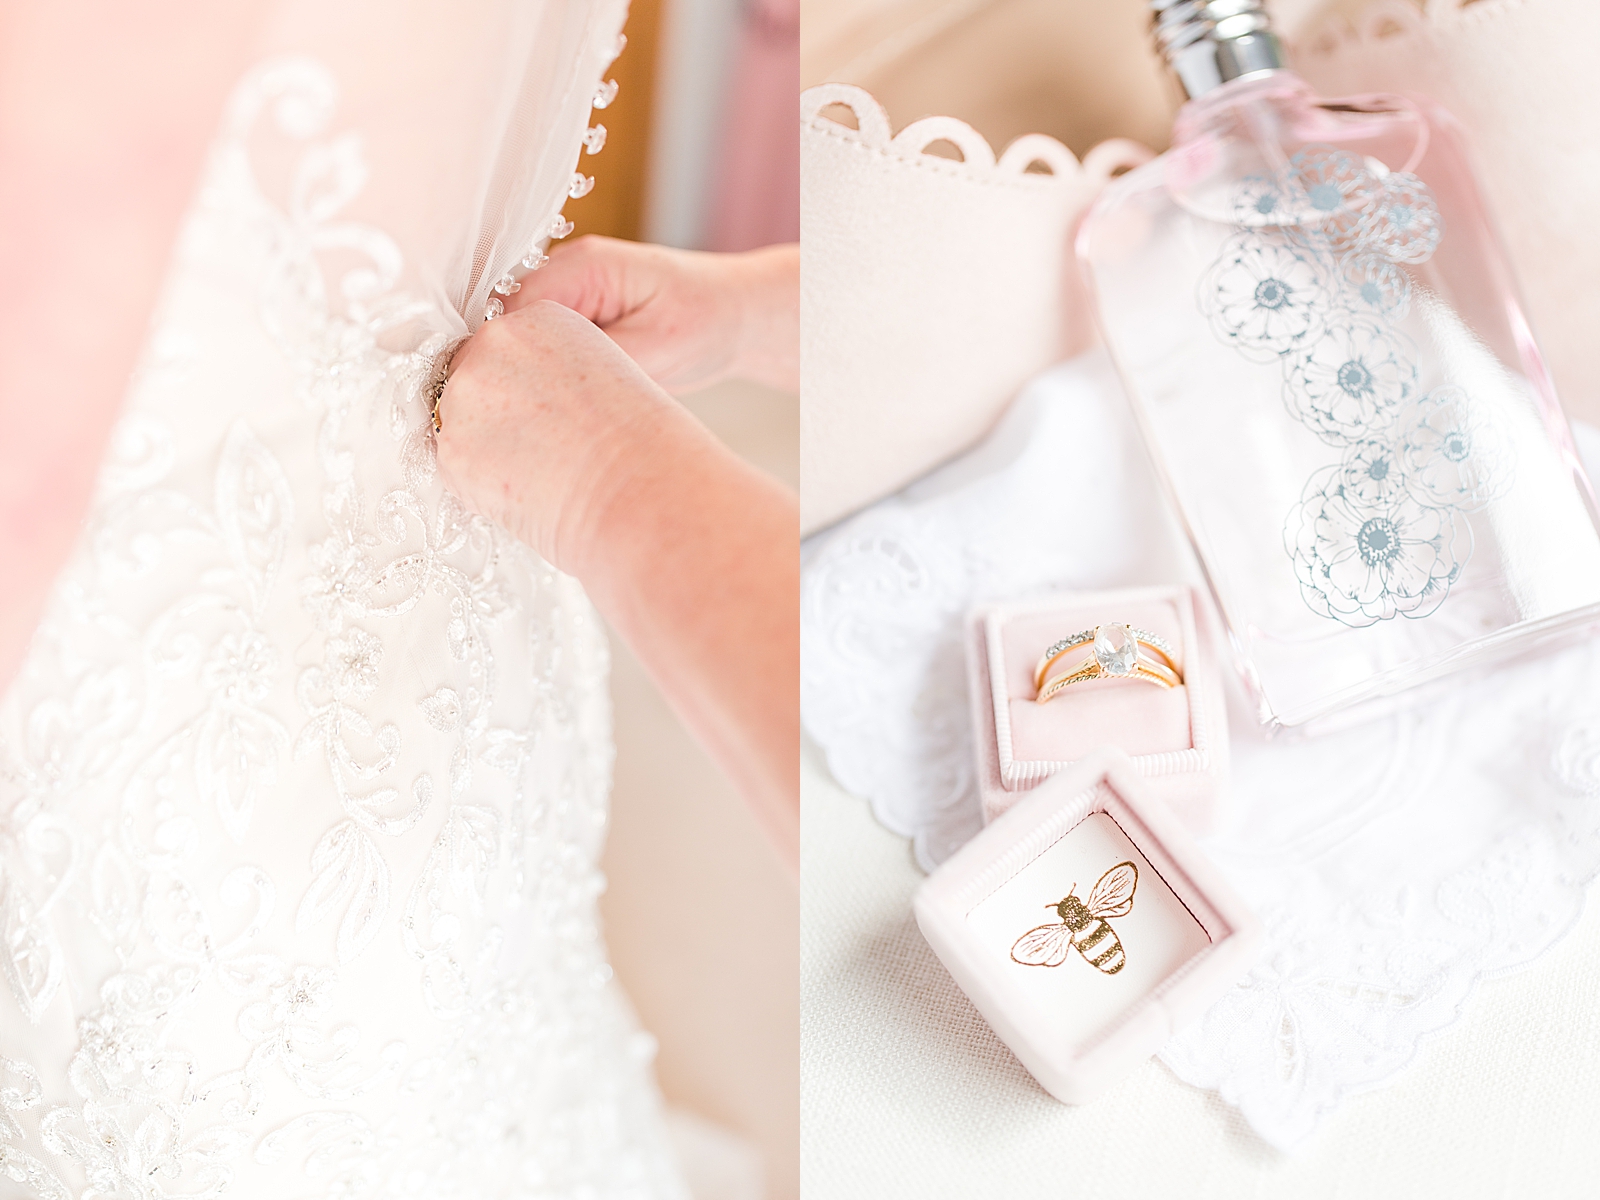 Macedonia Hills Wedding Bride getting dressed and Shoes Ring and Perfume detail Photos